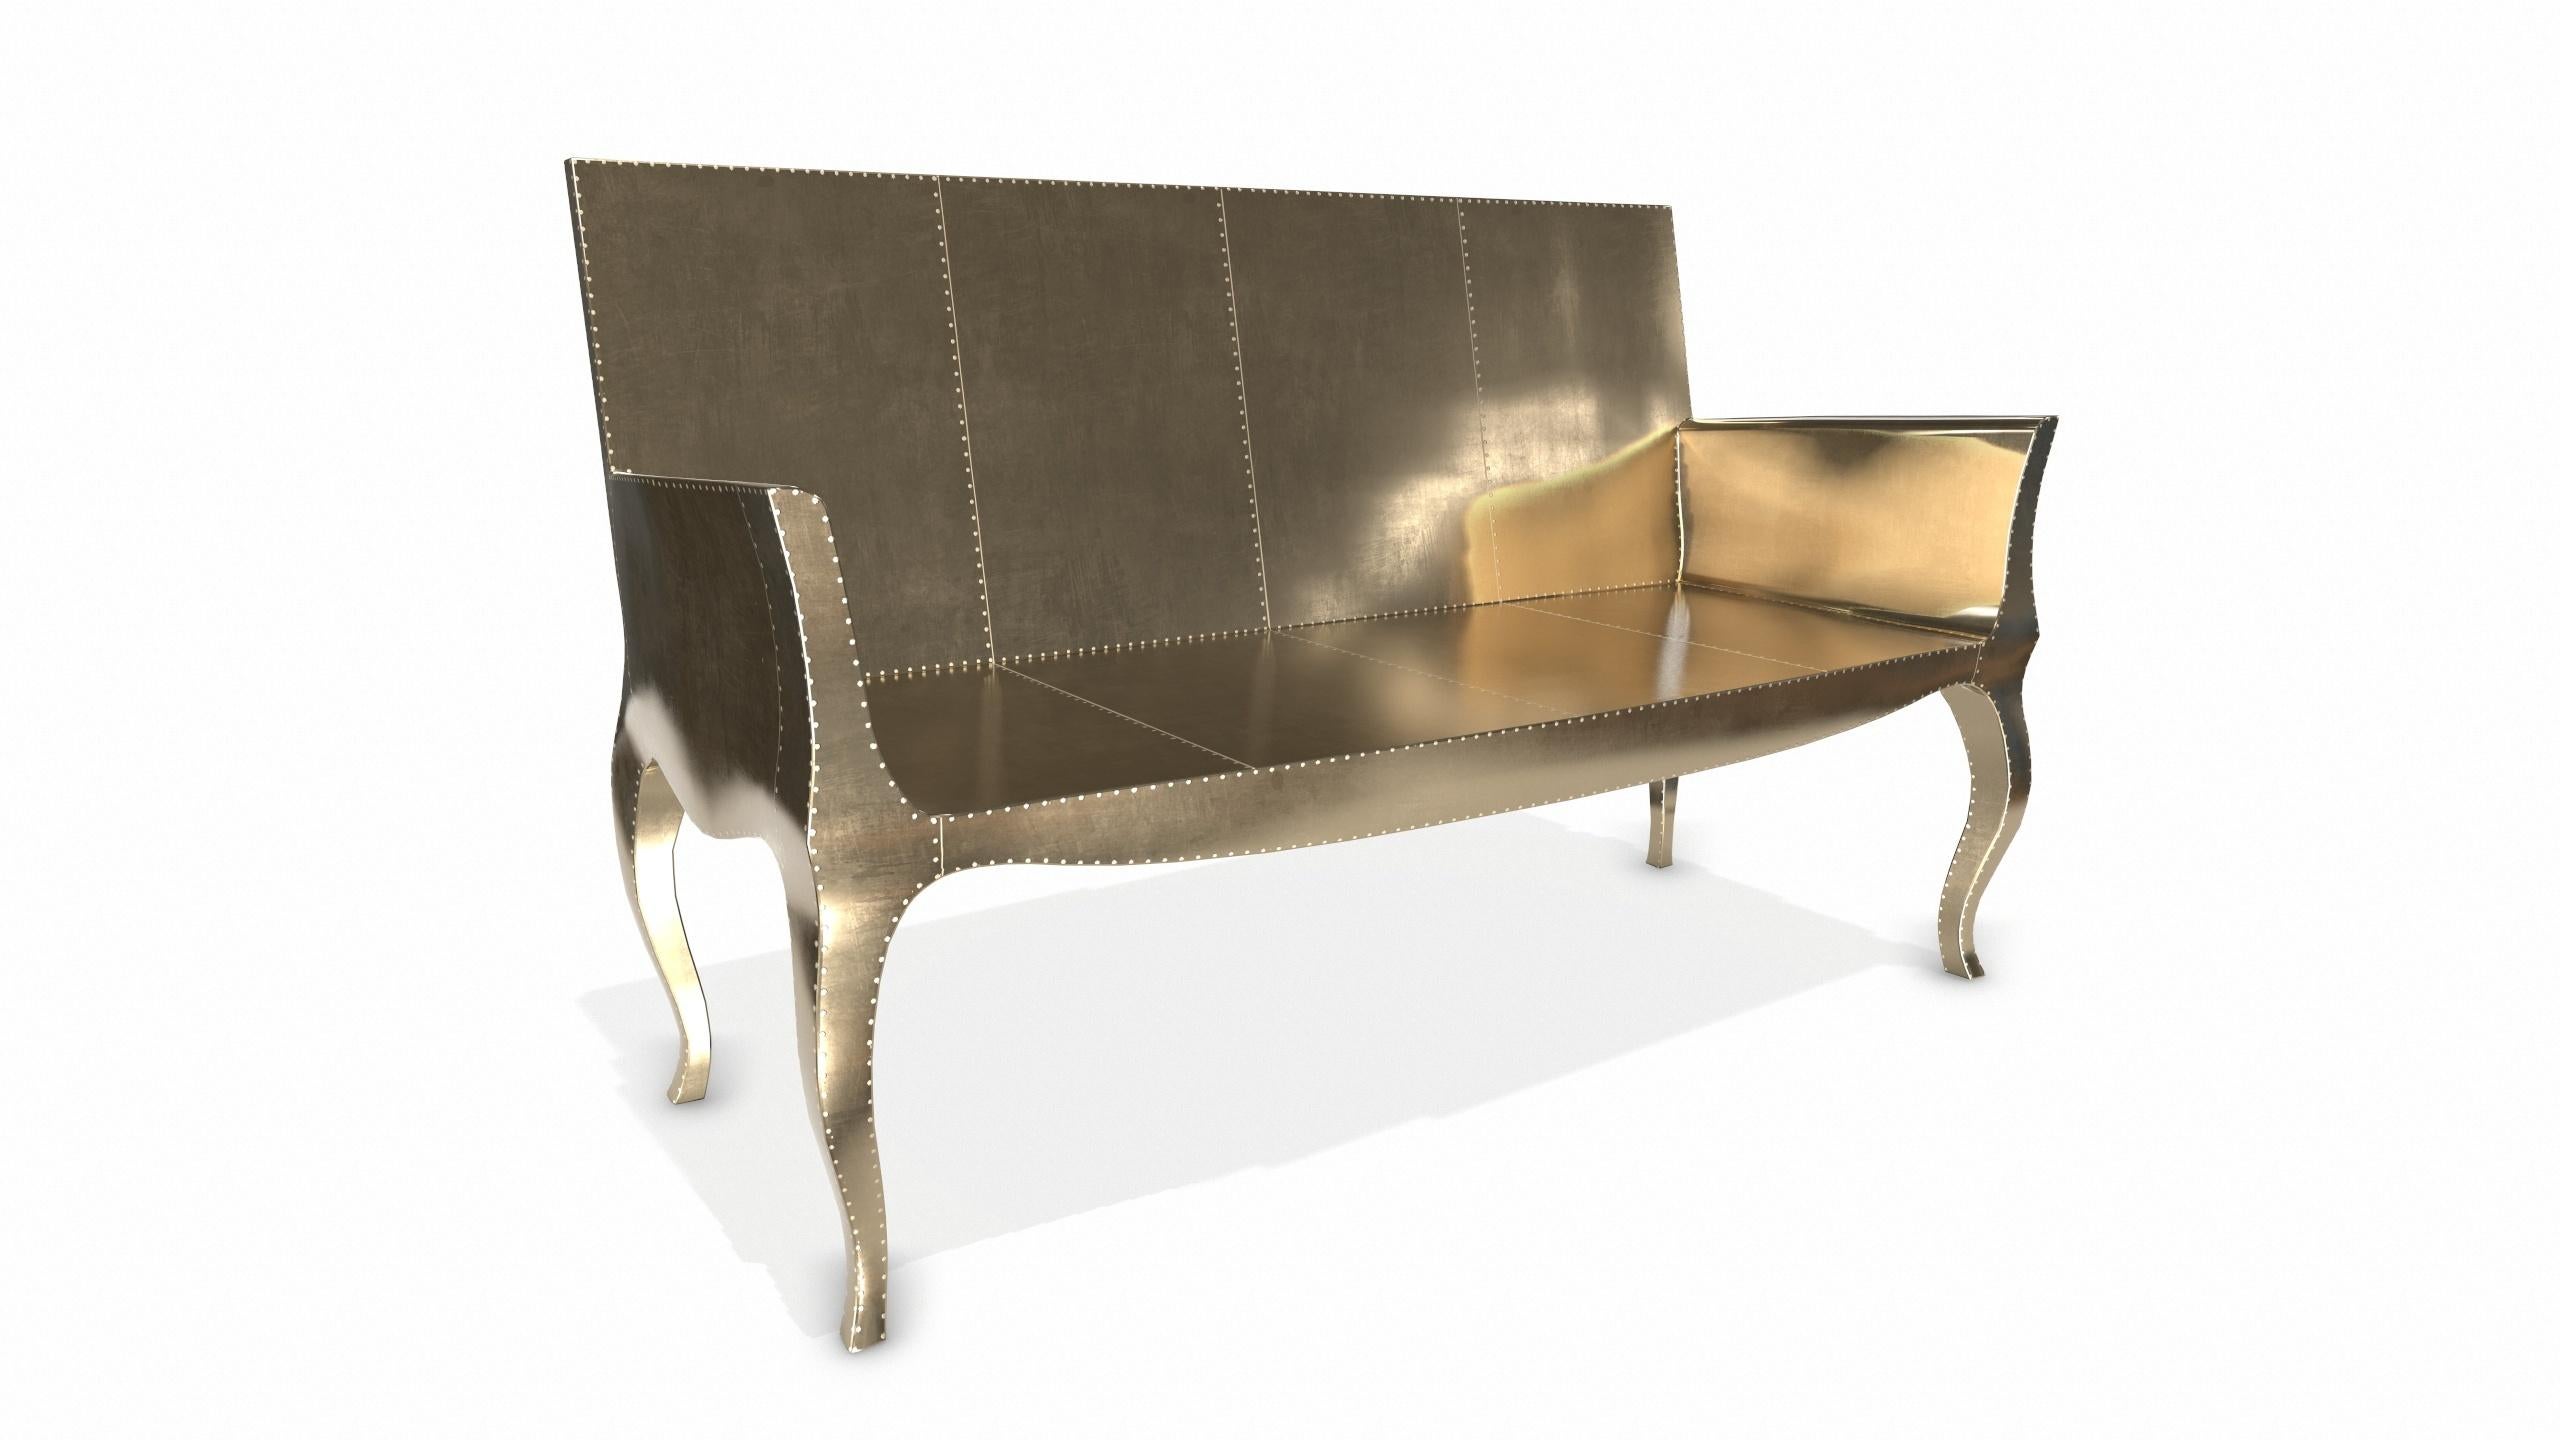 Contemporary Louise Settee Art Deco Benches in Smooth Brass by Paul Mathieu for S Odegard For Sale